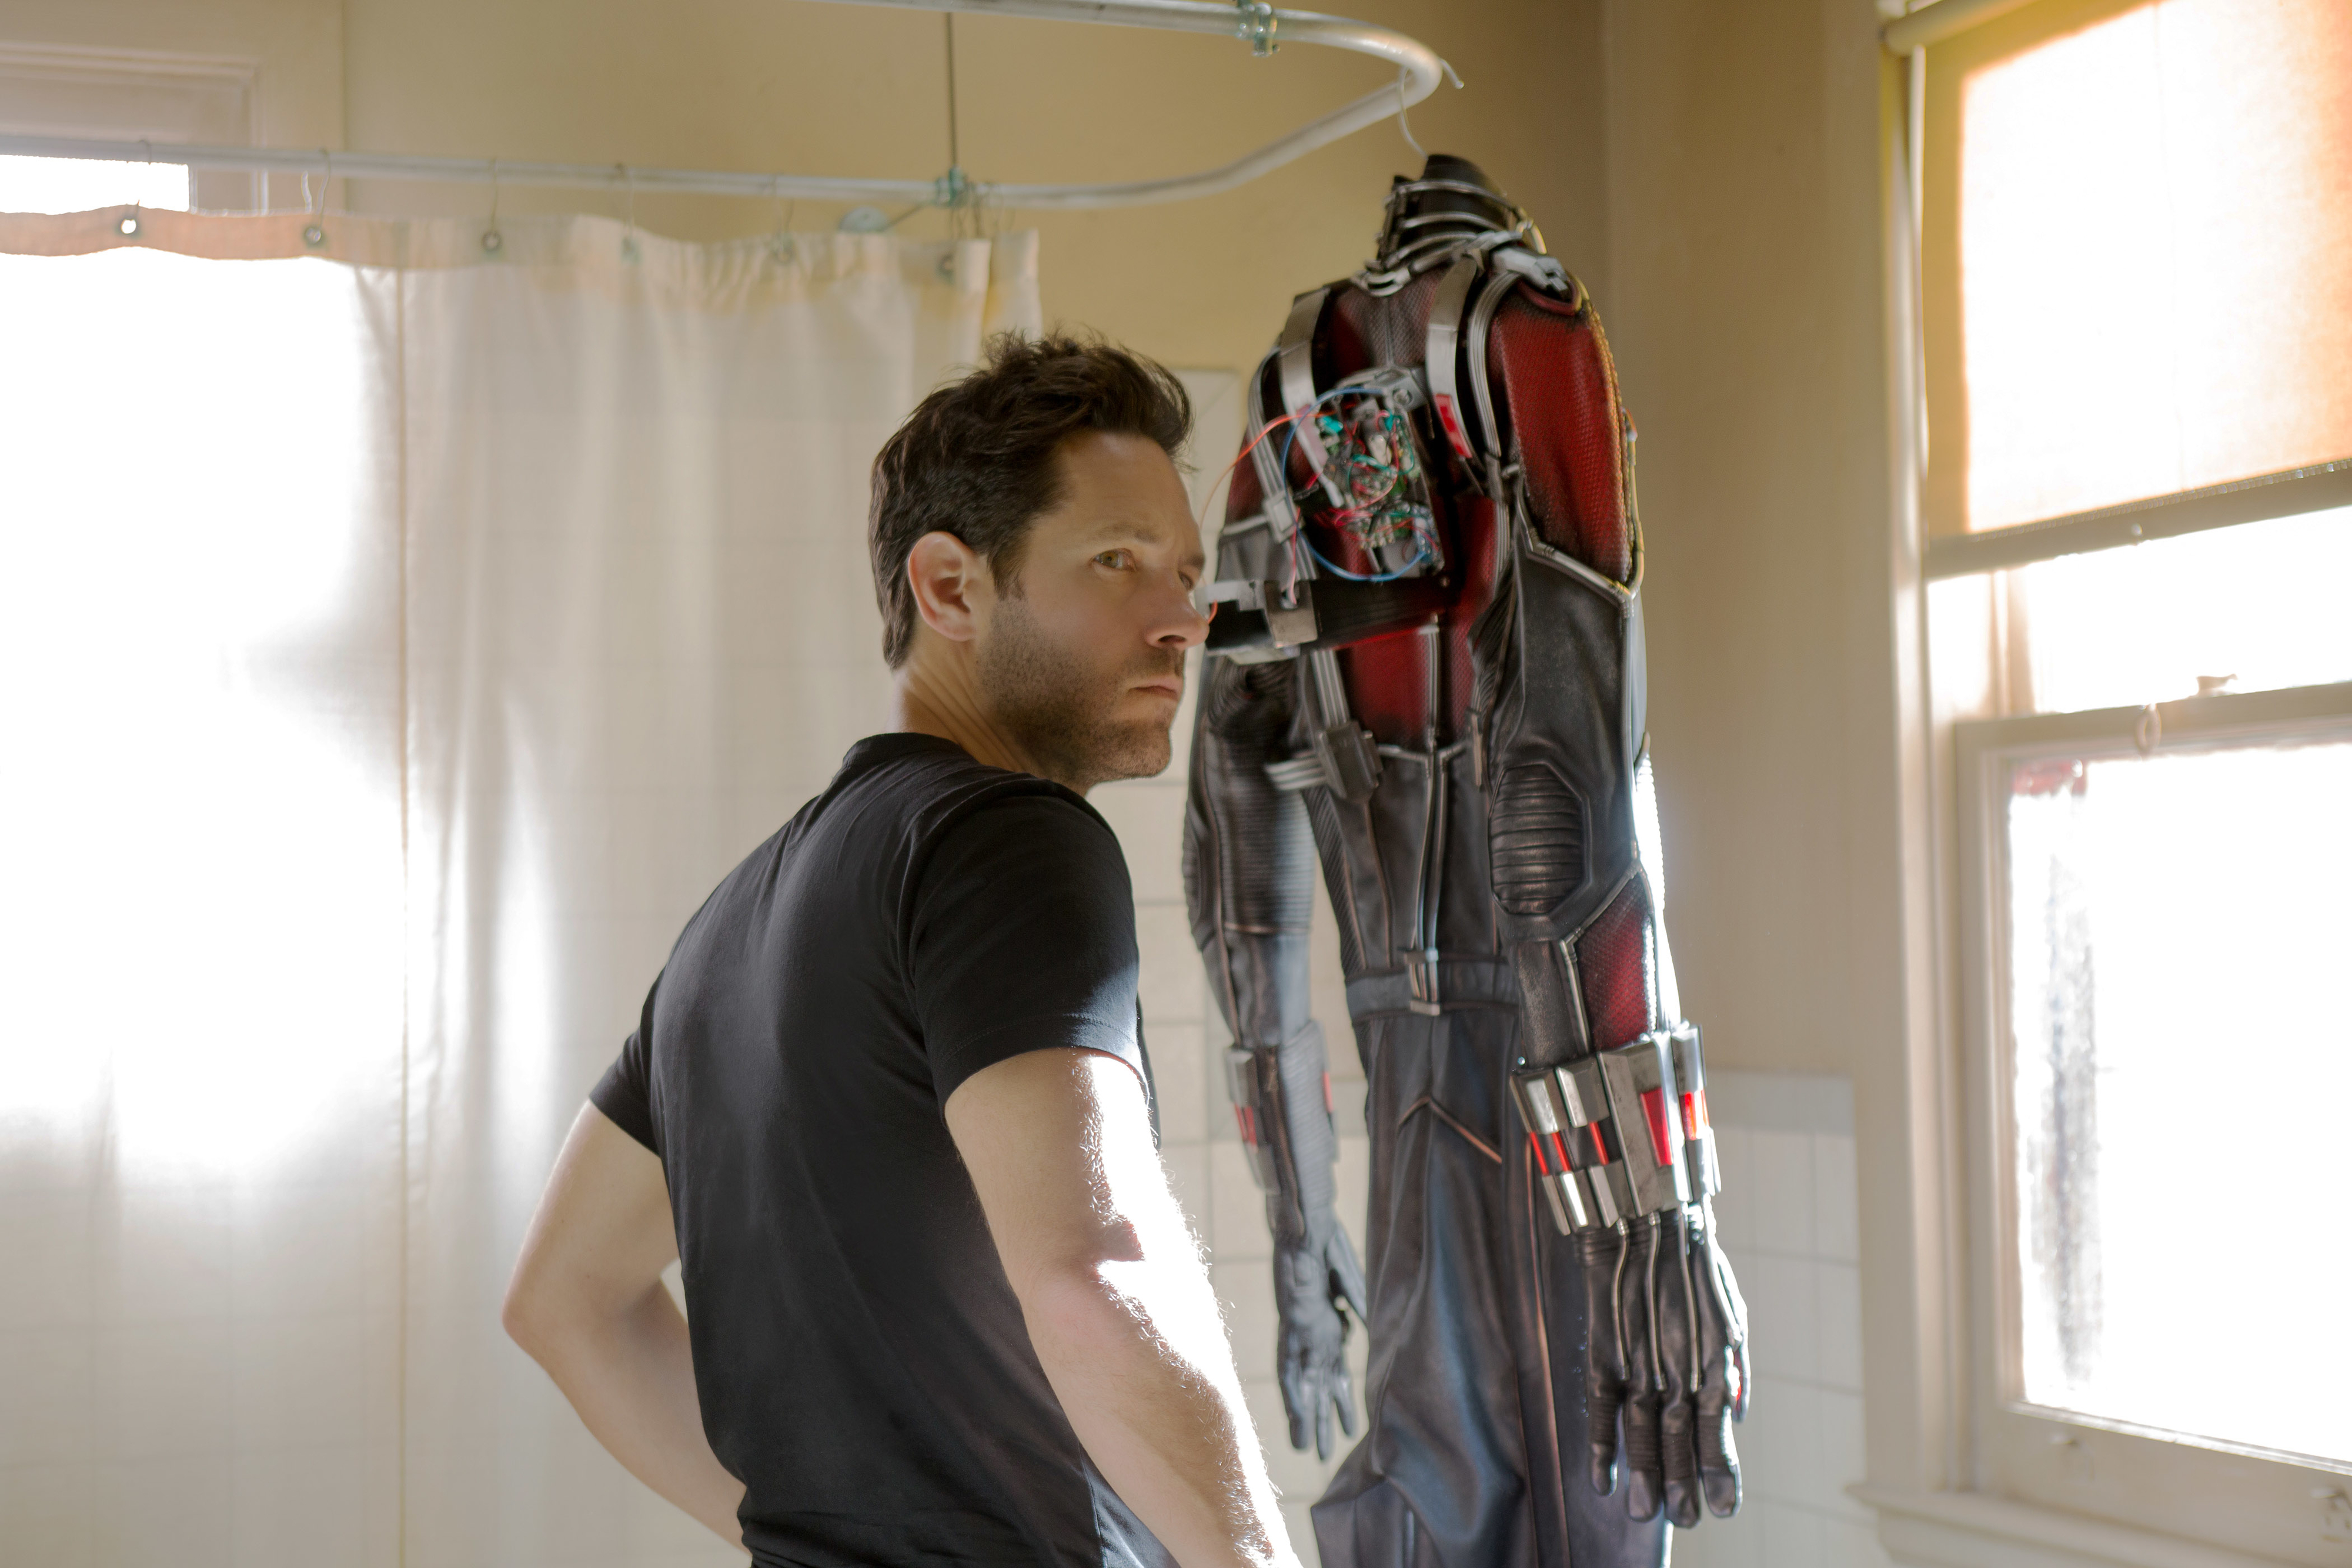 his character standing in front of his ant man suit